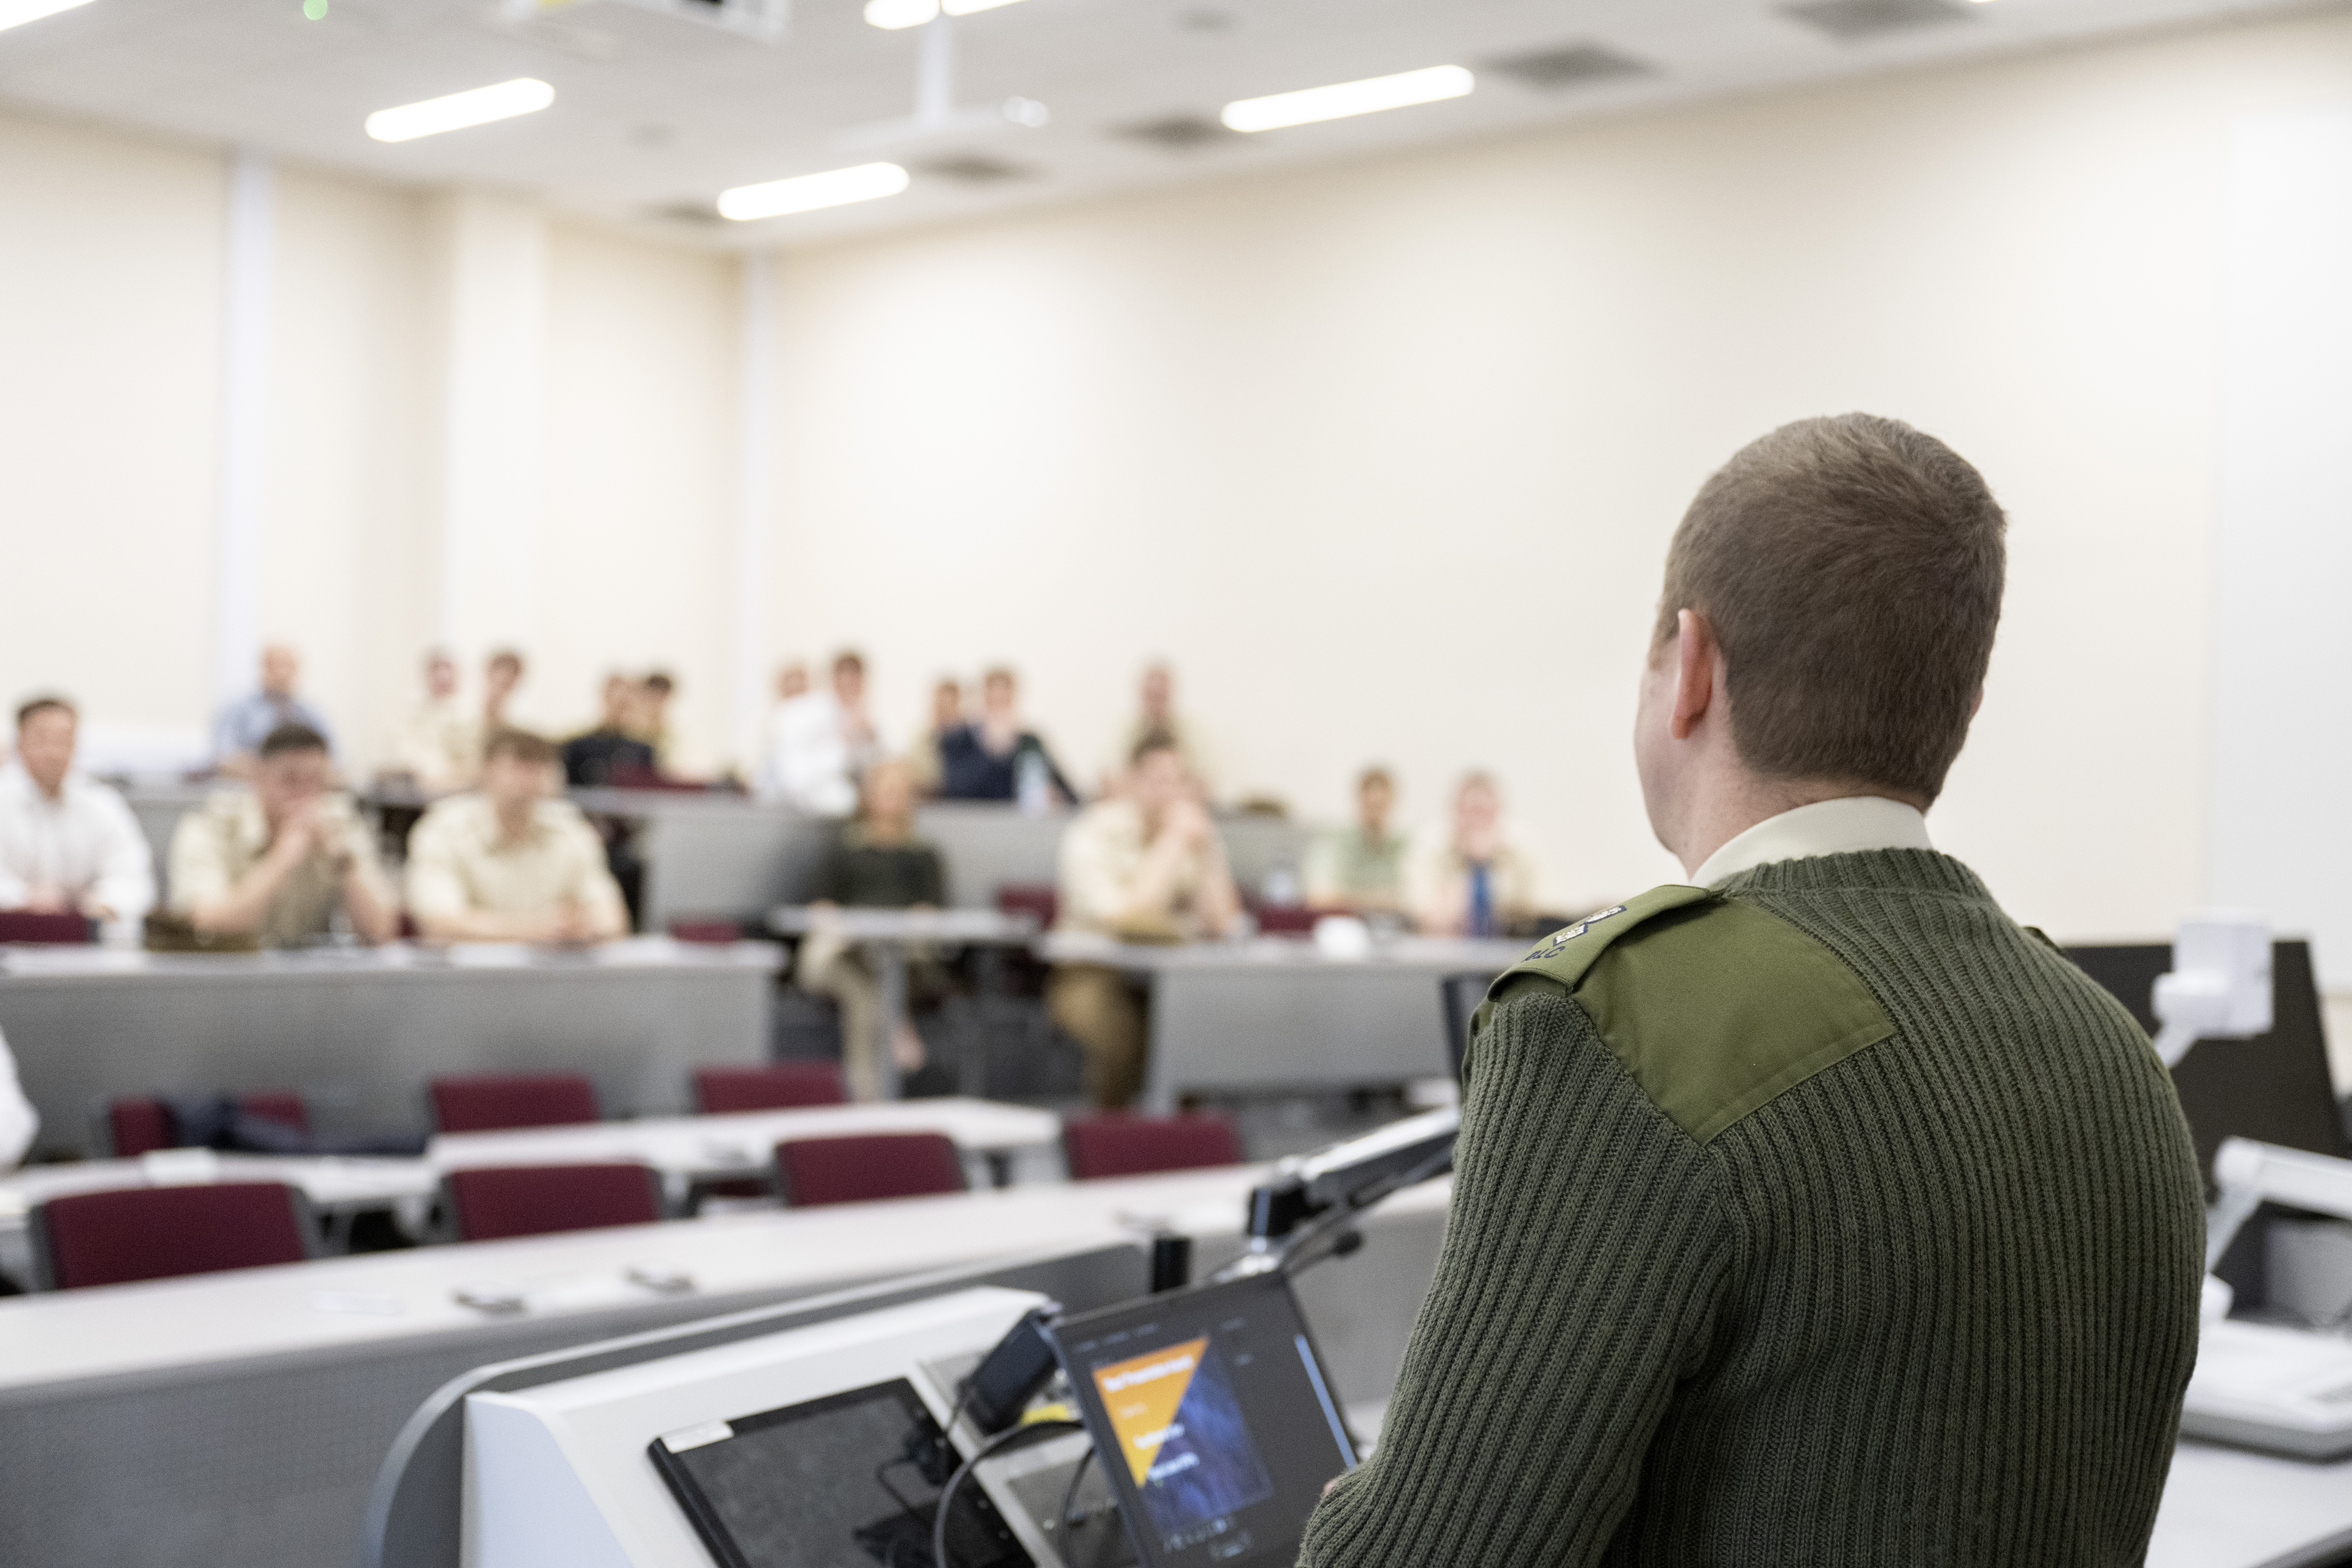 An army officer stood at a lectern presenting to an audience.